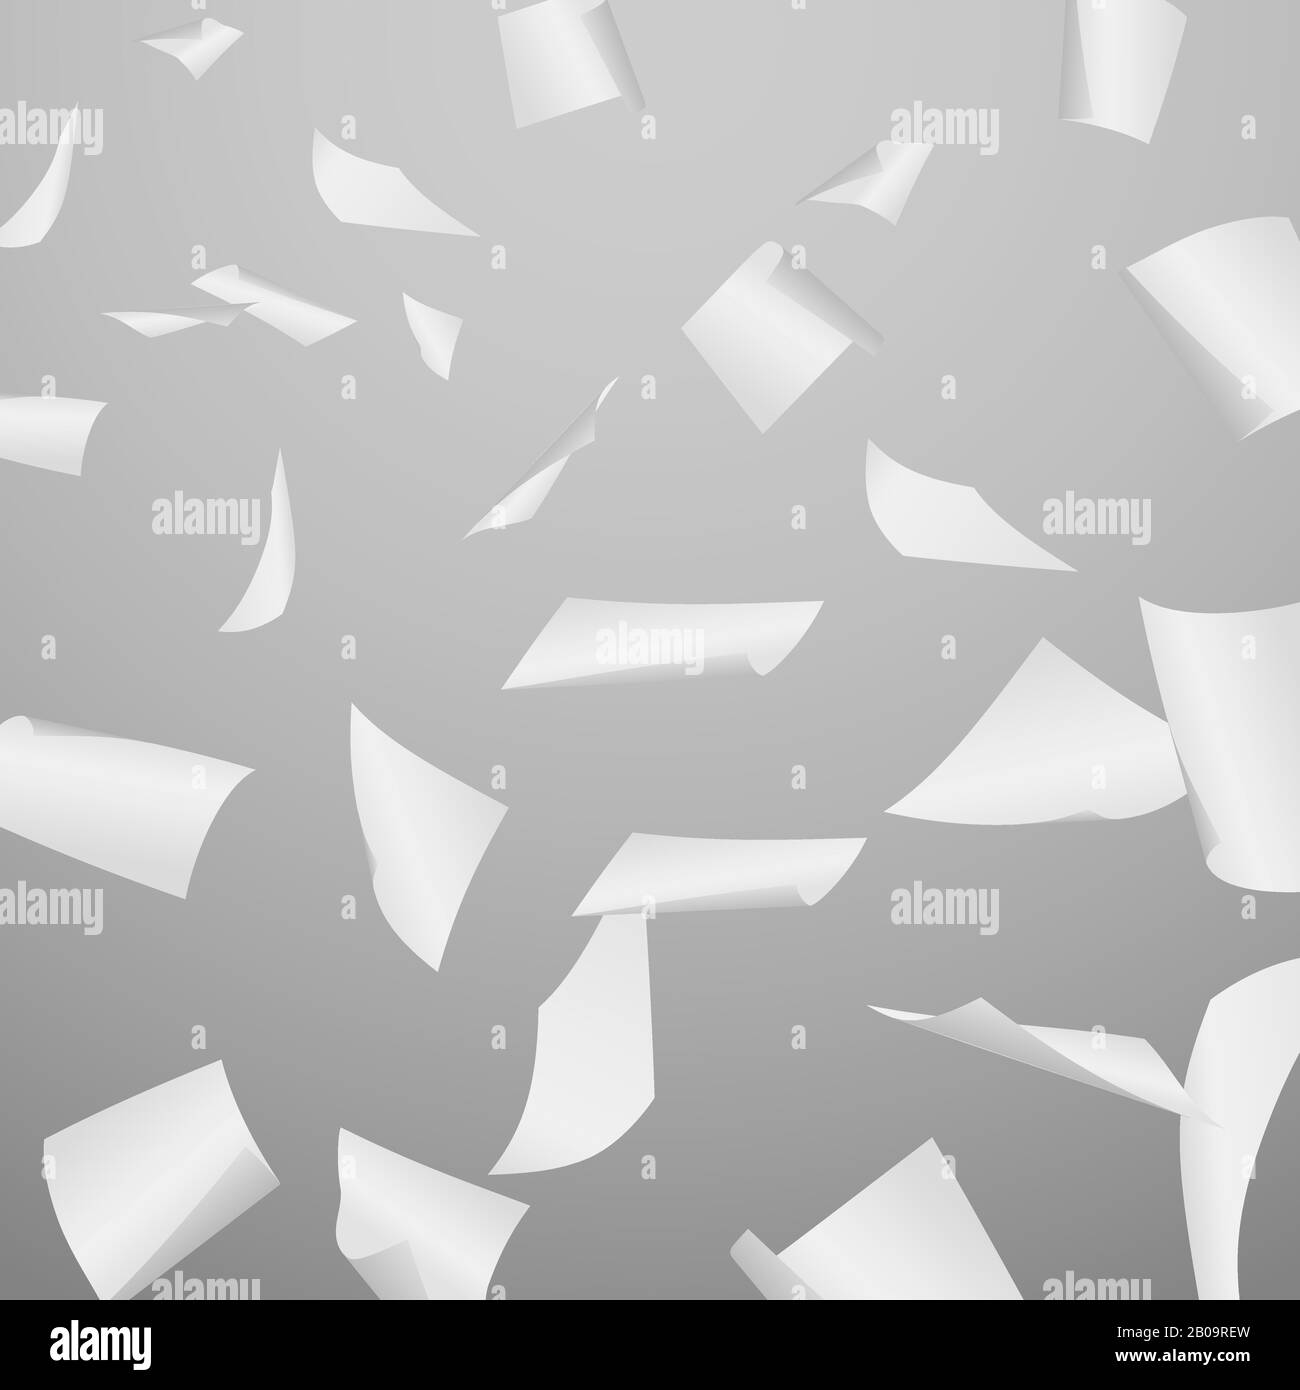 Abstract vector background with flying, falling, scattered office white paper sheets, documents. Background with flight paper, illustration of clear chaotic paper Stock Vector